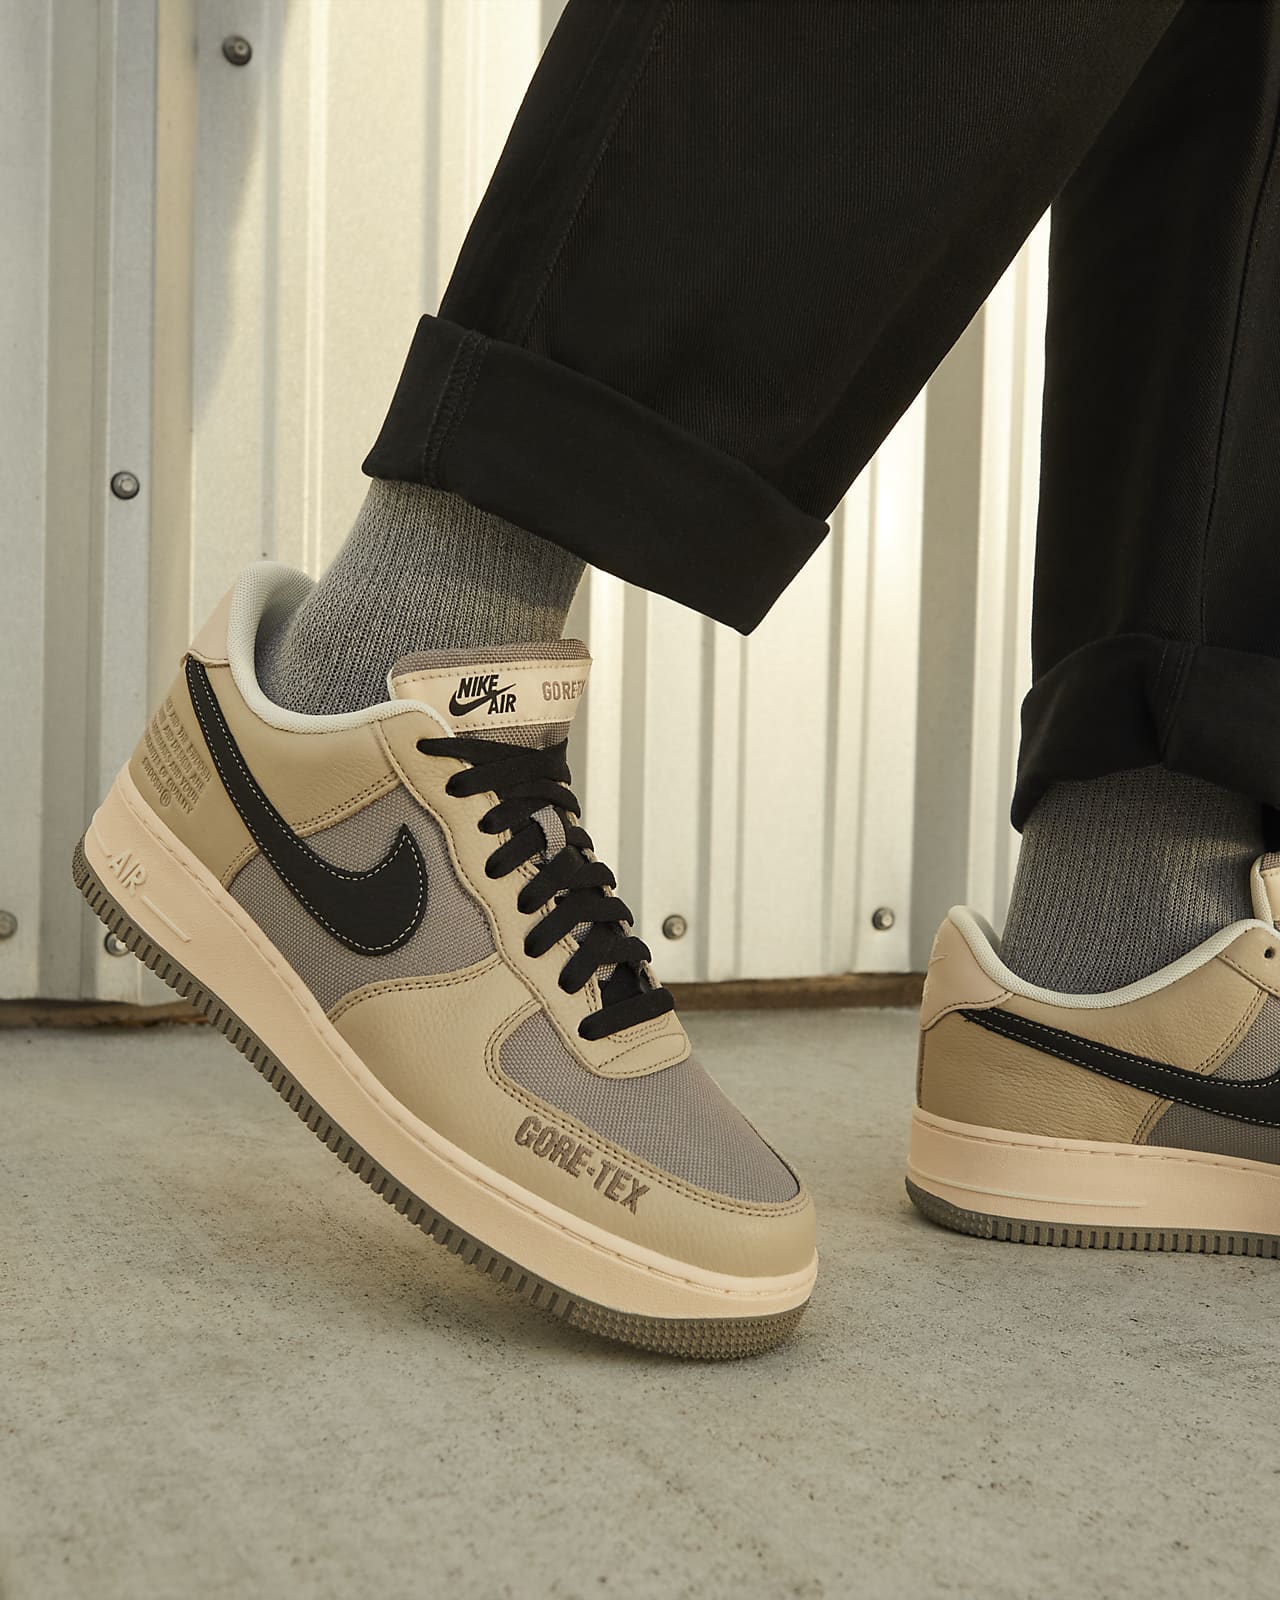 Nike Air Force 1 GTX Men's Shoes. Nike IN قاع الهامور